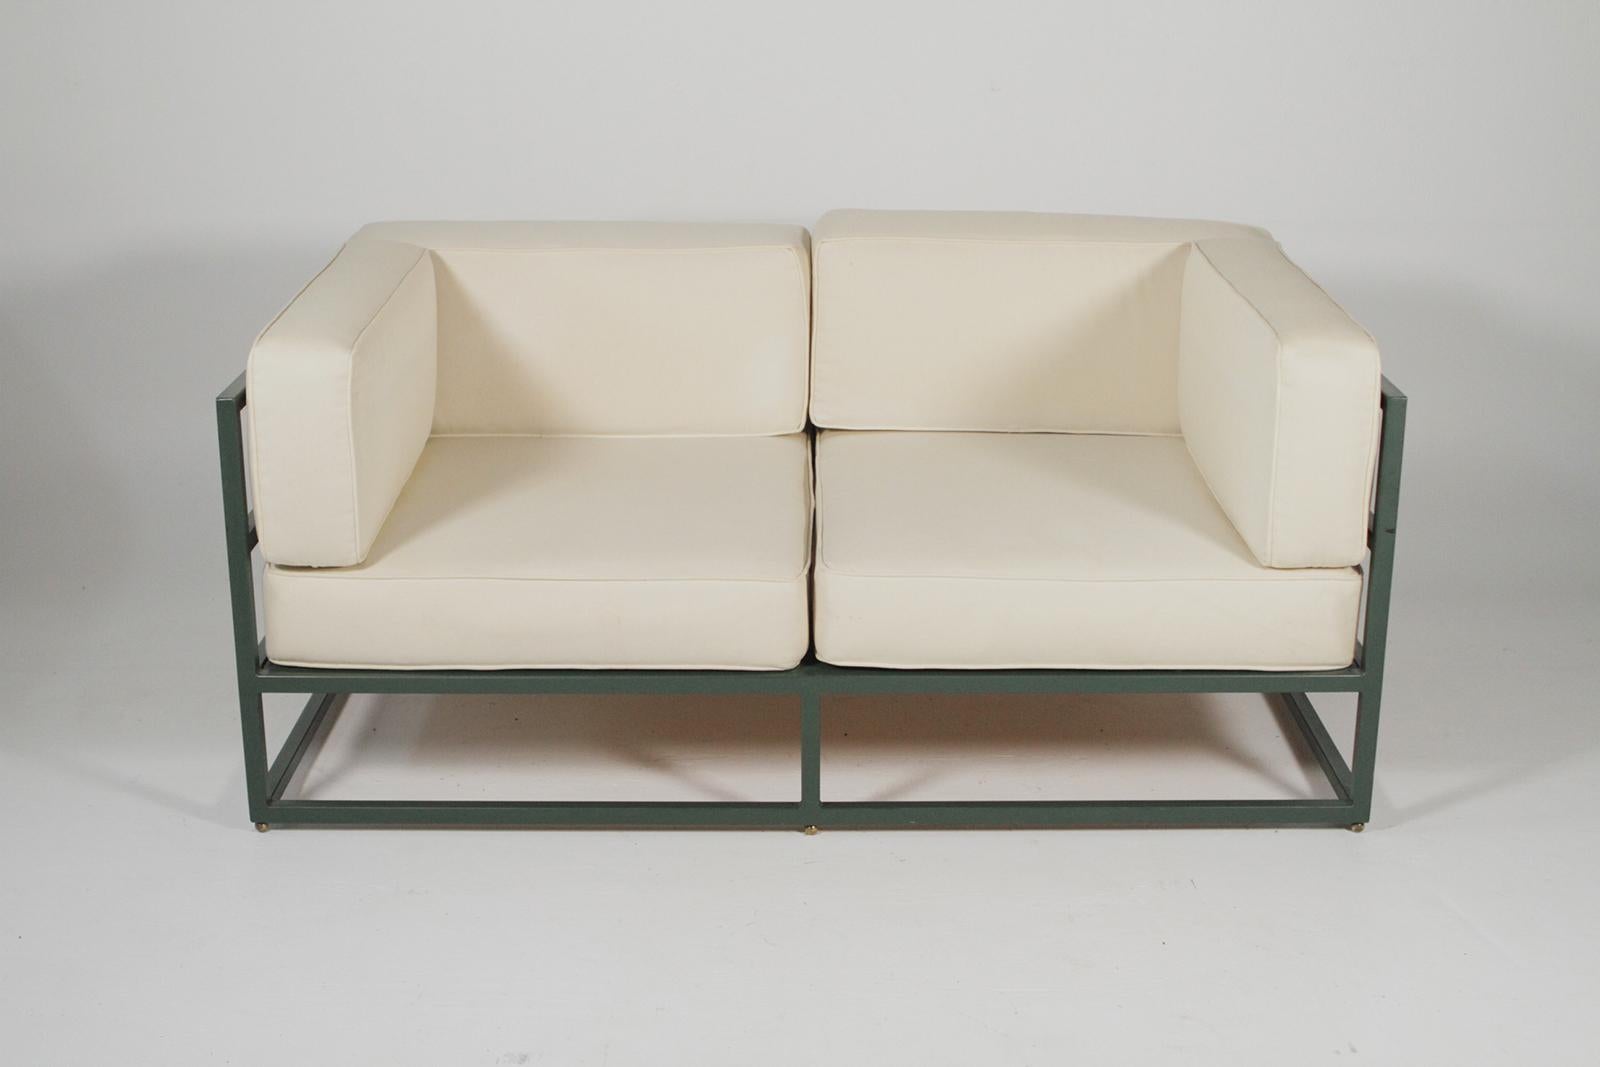 Hugh Newell Jacobsen custom made love seats with original green enameled steel frames, cushions could use a cleaning or new upholstery. These were a custom order in 1987 and there’s a sketch from Newell himself and signed. This is one of the